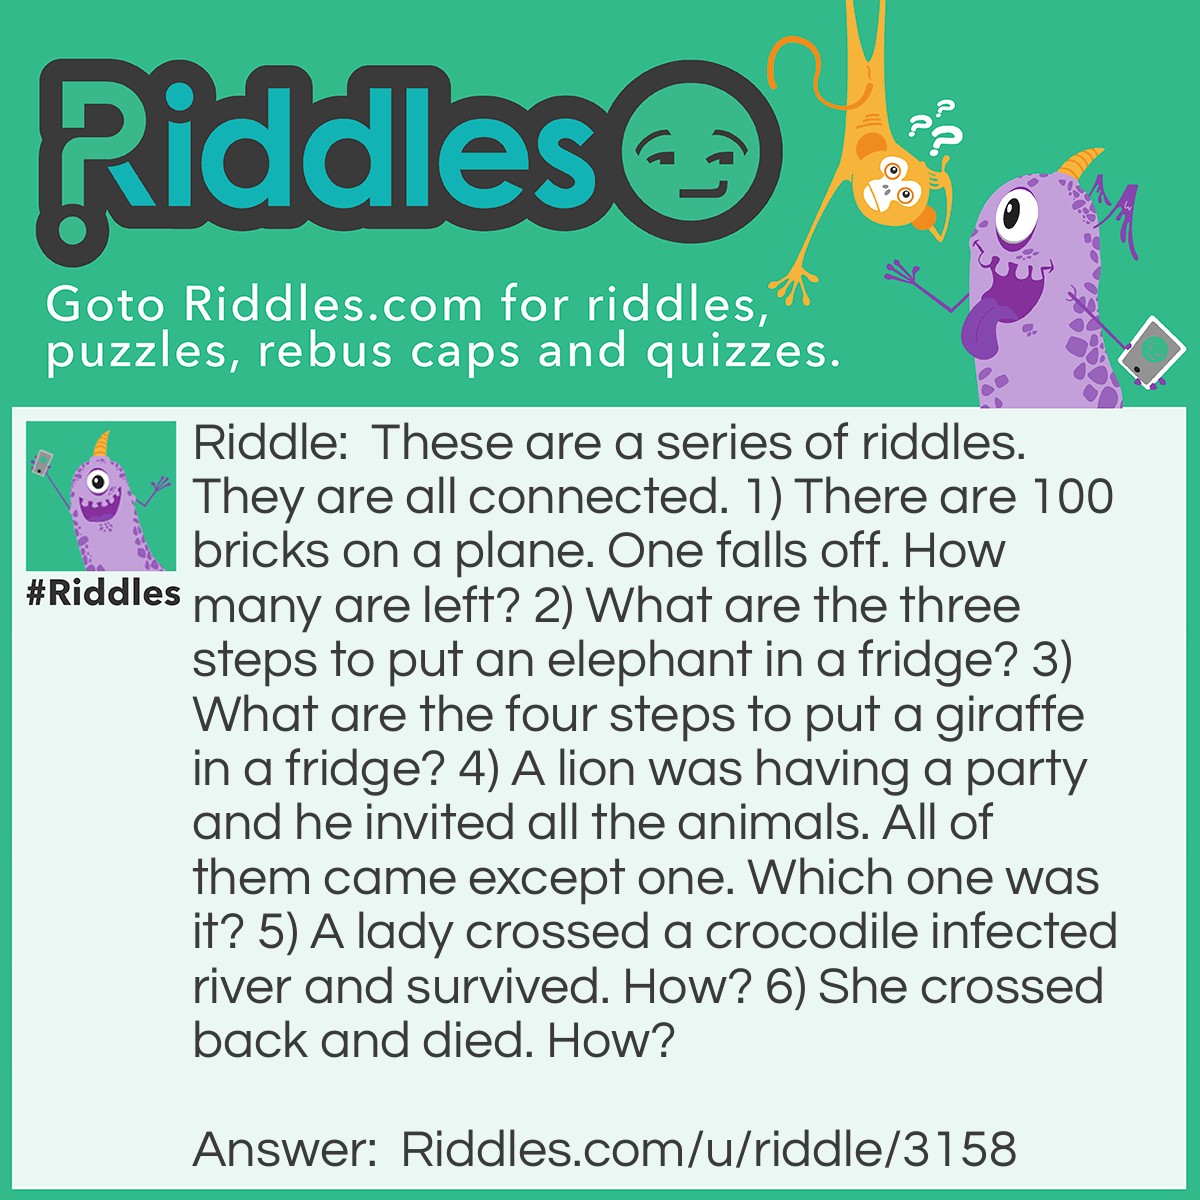 Riddle: These are a series of riddles. They are all connected. 1) There are 100 bricks on a plane. One falls off. How many are left? 2) What are the three steps to put an elephant in a fridge? 3) What are the four steps to put a giraffe in a fridge? 4) A lion was having a party and he invited all the animals. All of them came except one. Which one was it? 5) A lady crossed a crocodile infected river and survived. How? 6) She crossed back and died. How? Answer: 1) 99 2) Open the door, put the elephant in, close the door. 3) Open the door, take the elephant out, put the giraffe in, close the door. 4) The giraffe. It was in the fridge. 5) The crocodiles were at the party. 6) The brick from the plane hit her in the head.